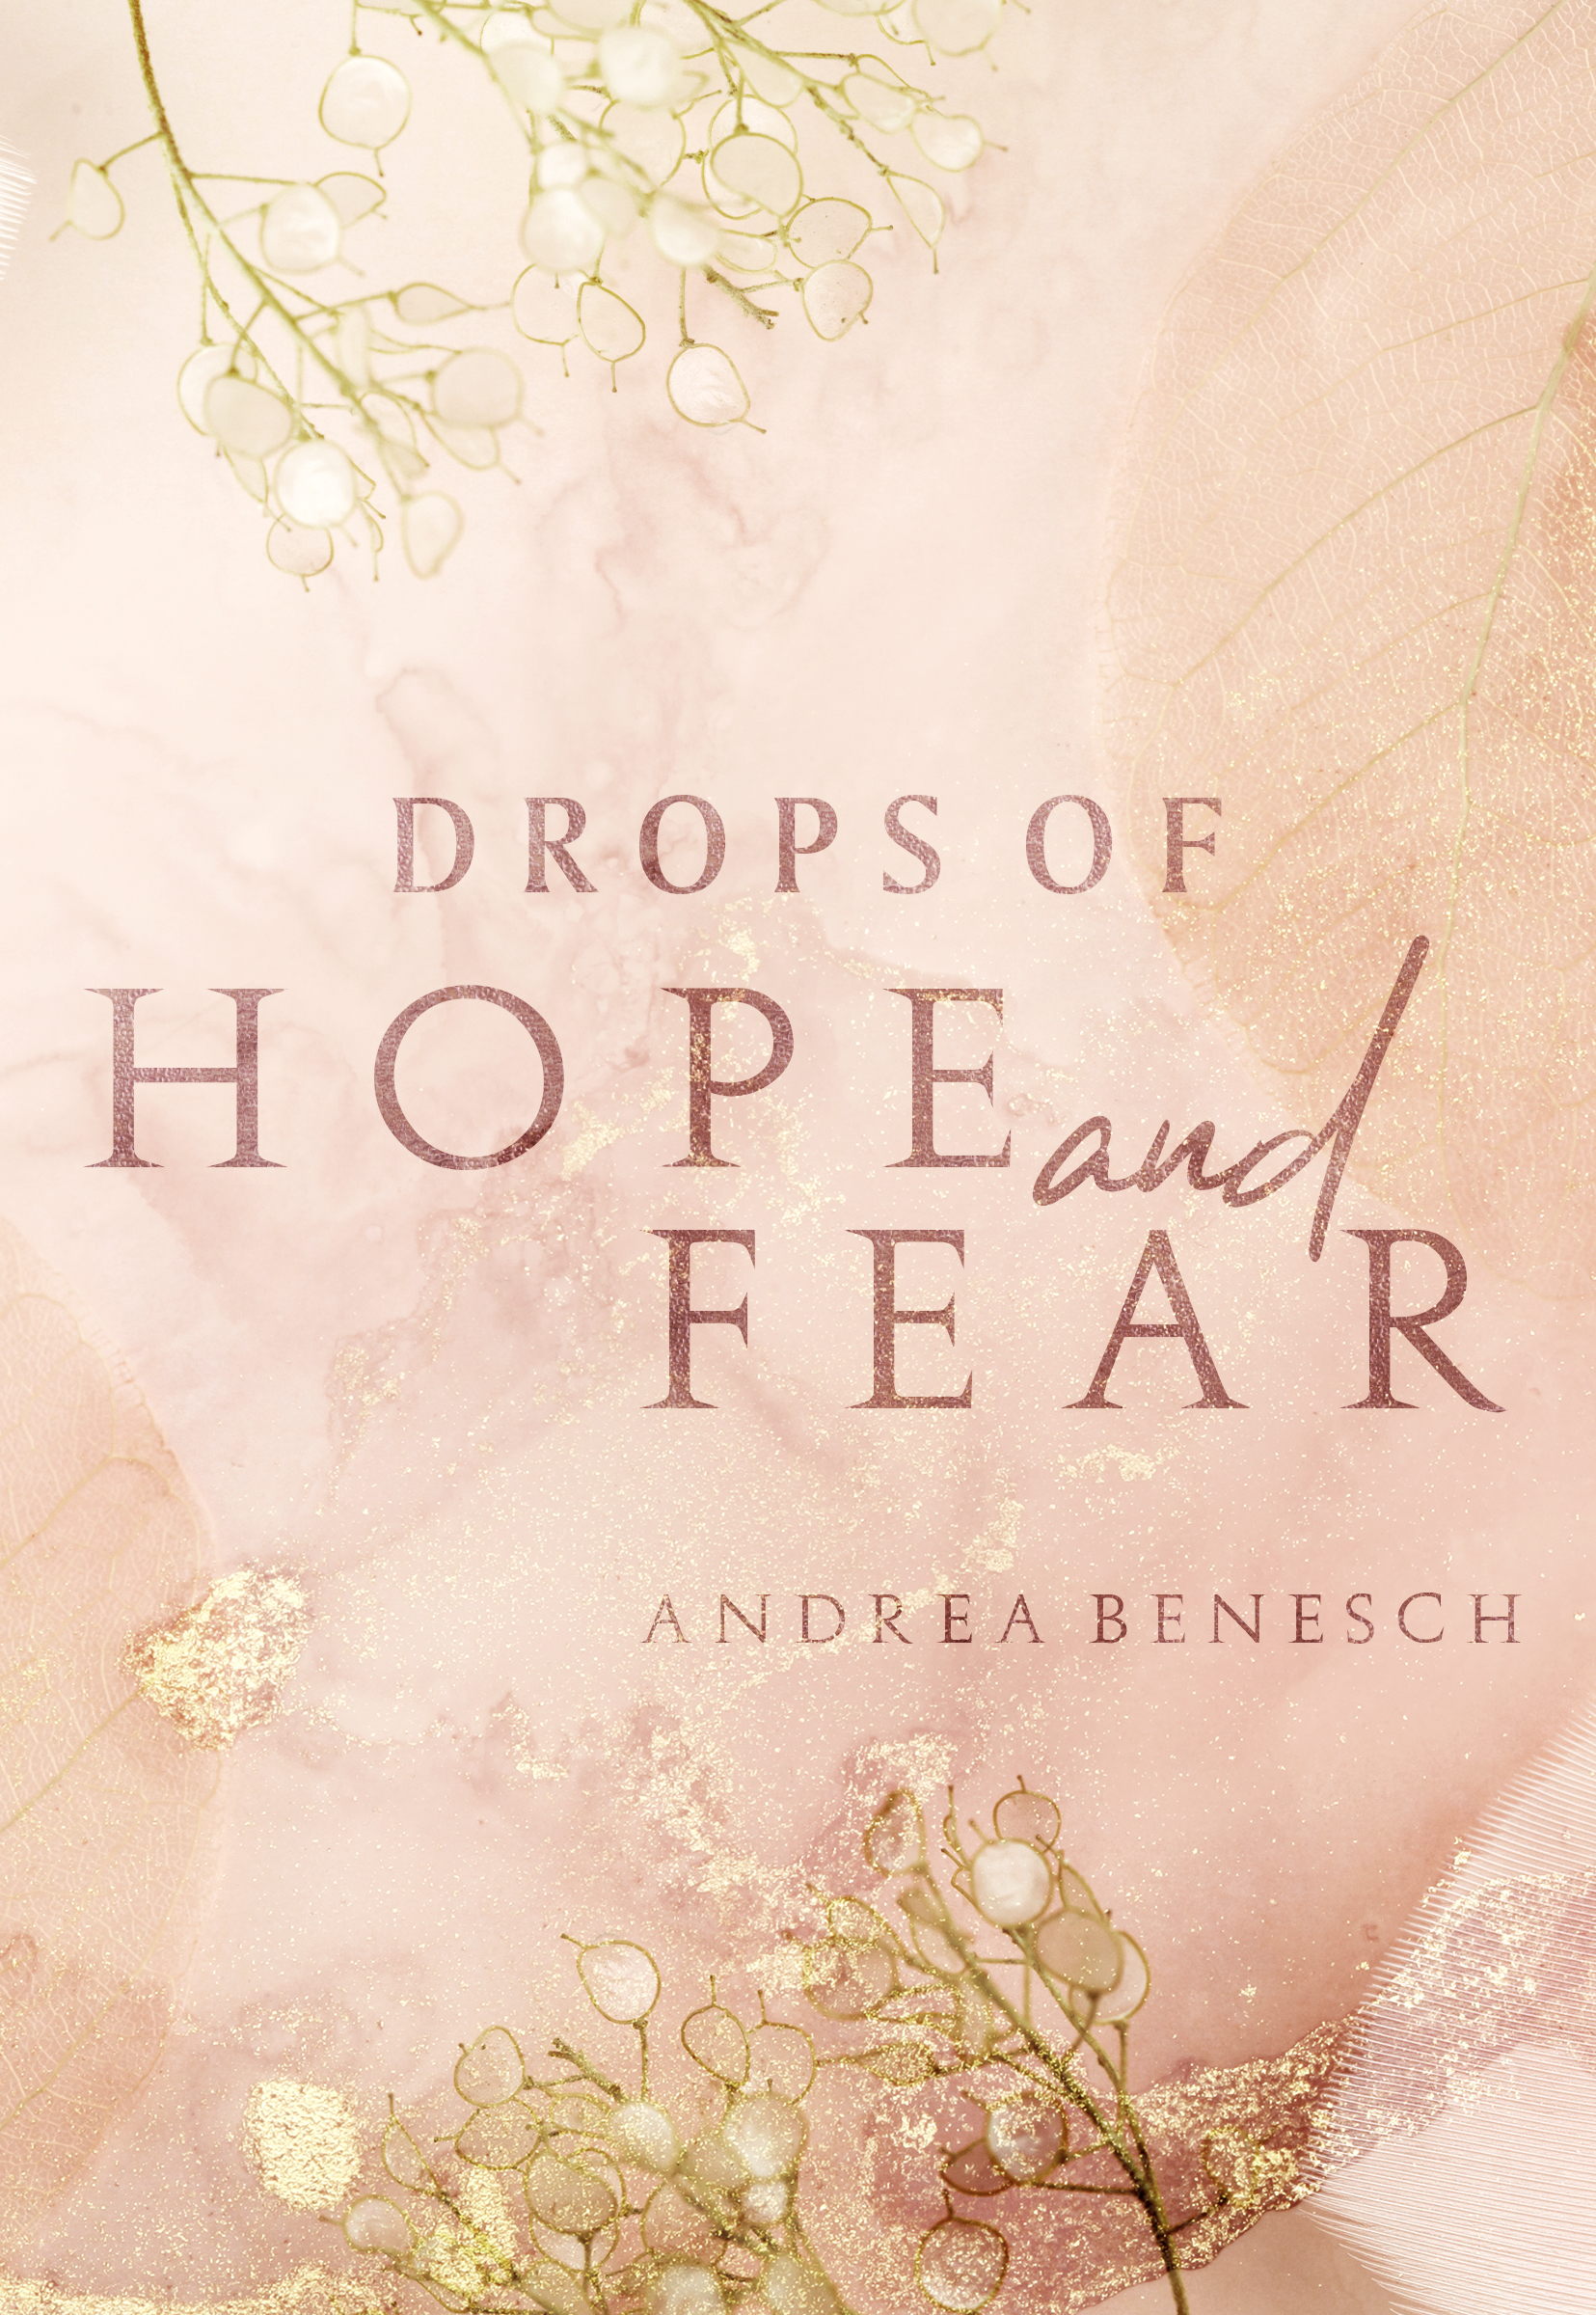 Drops of Hope and Fear